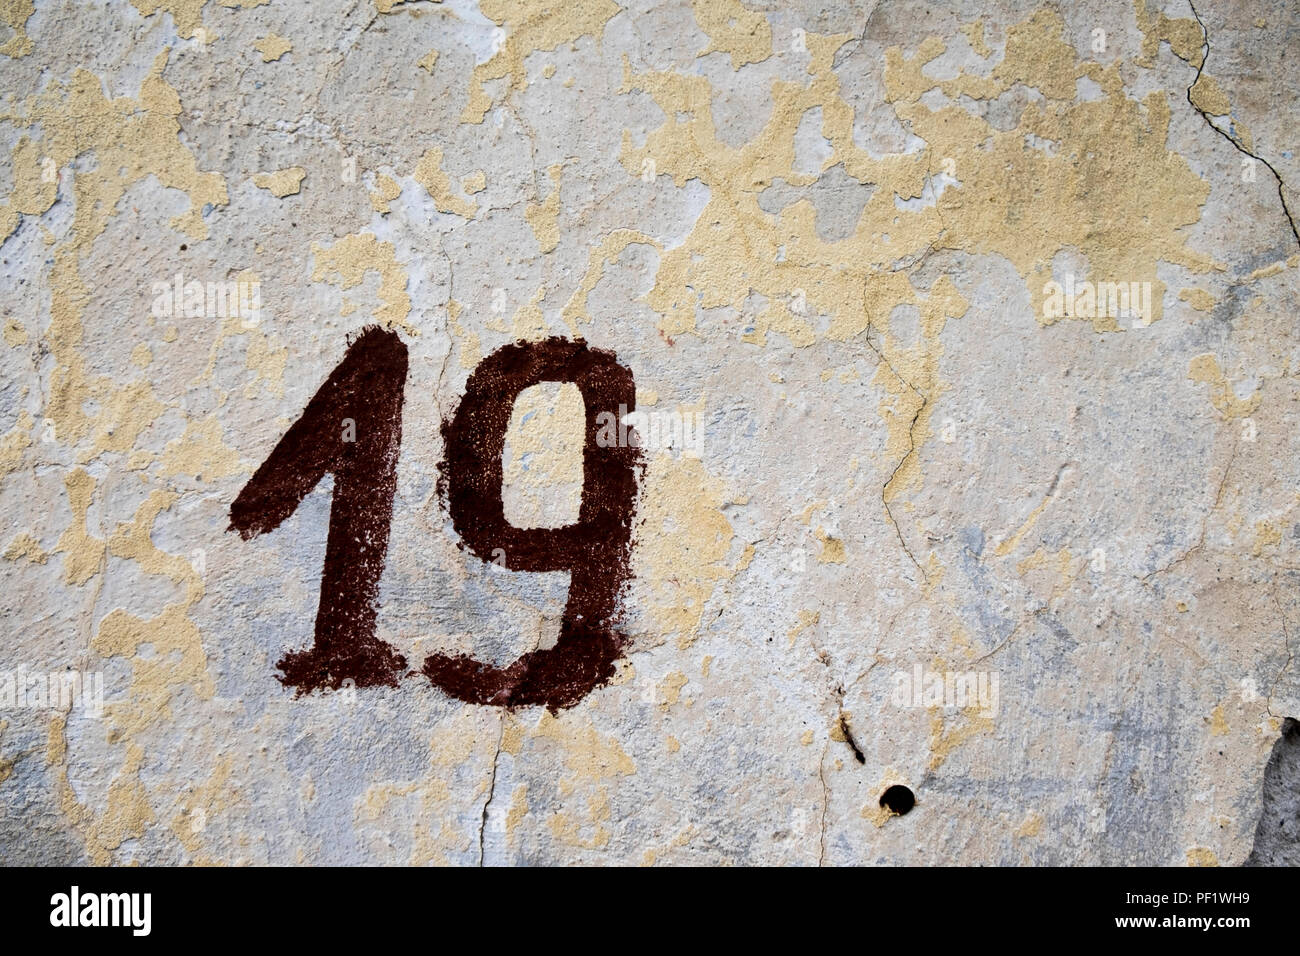 Street address number 19 (nineteen) painted on a textured cement wall with cracks and peeling paint Stock Photo